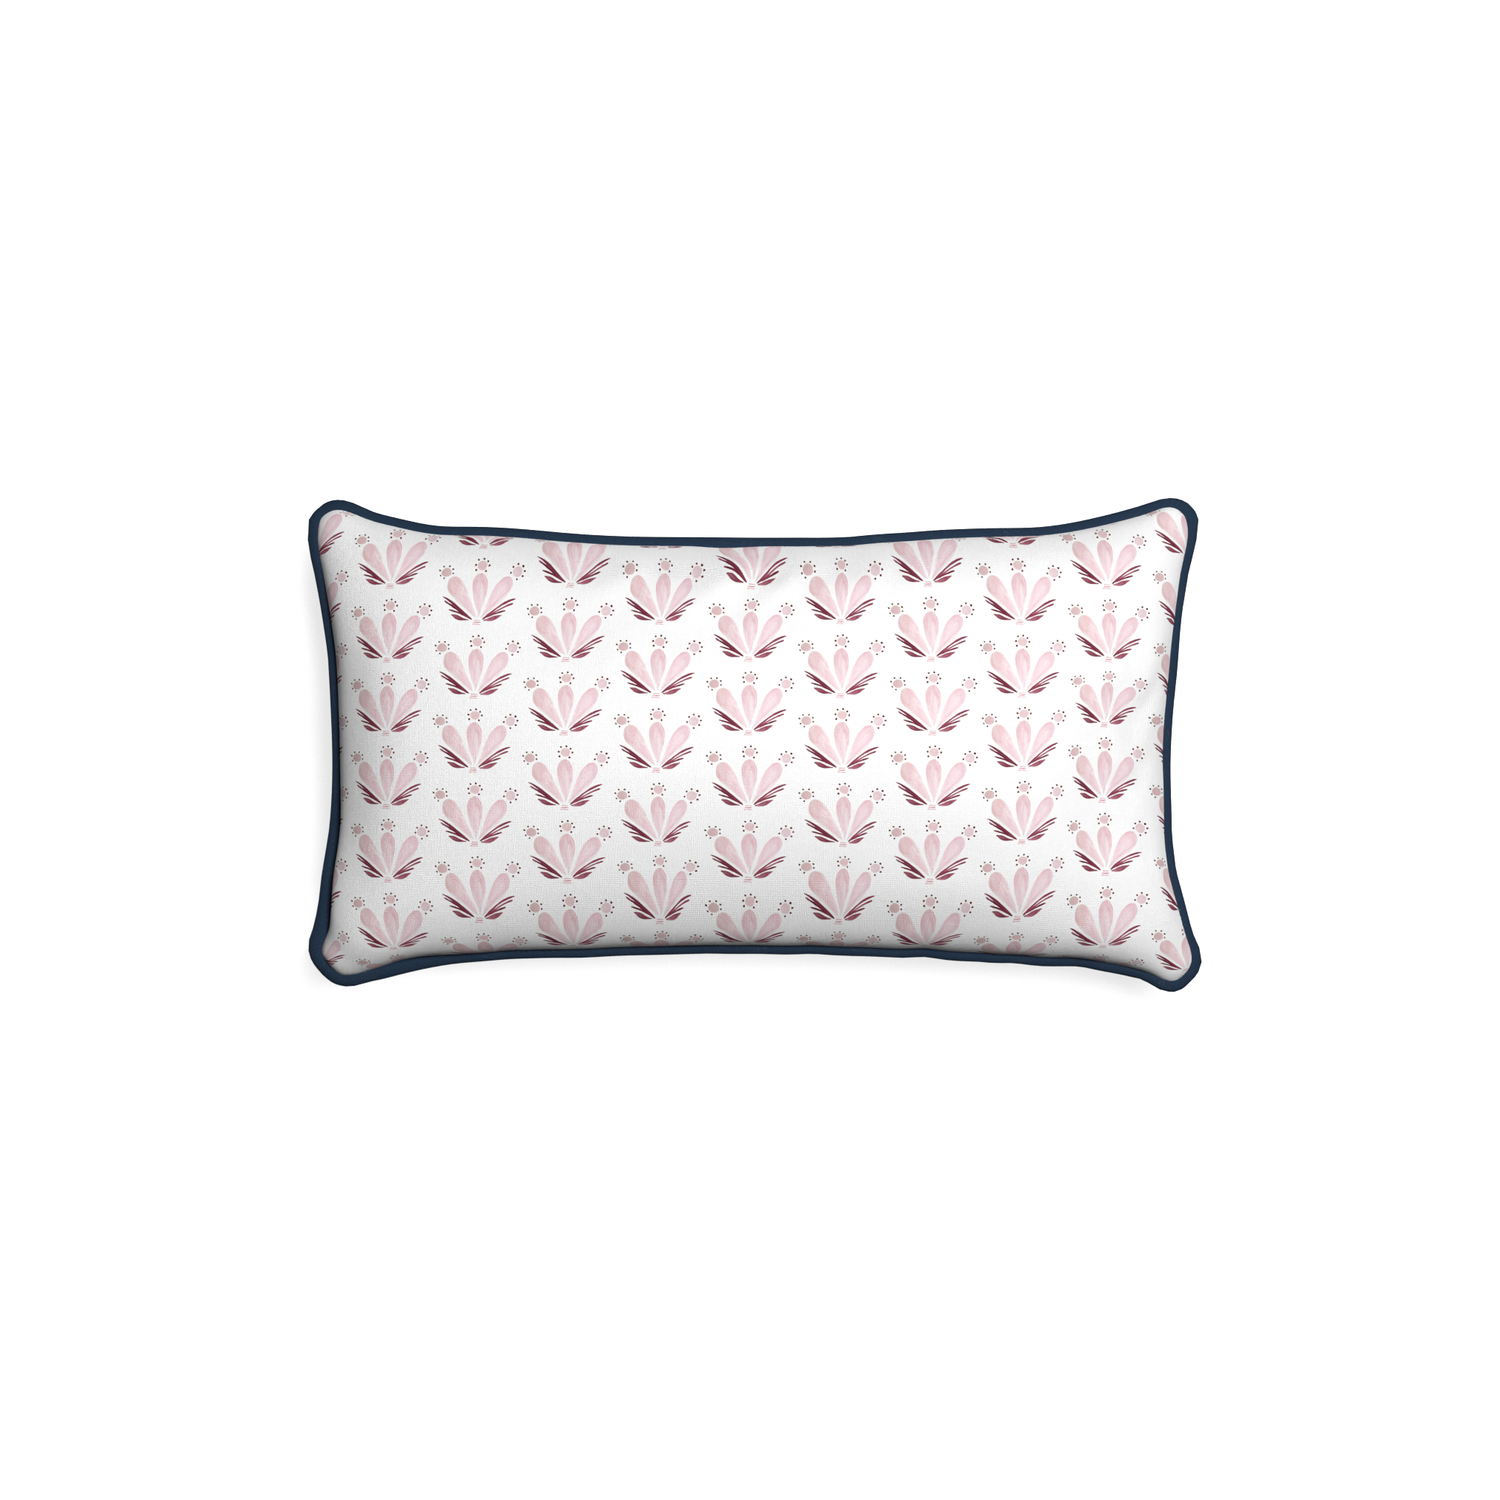 Petite-lumbar serena pink custom pink & burgundy drop repeat floralpillow with c piping on white background